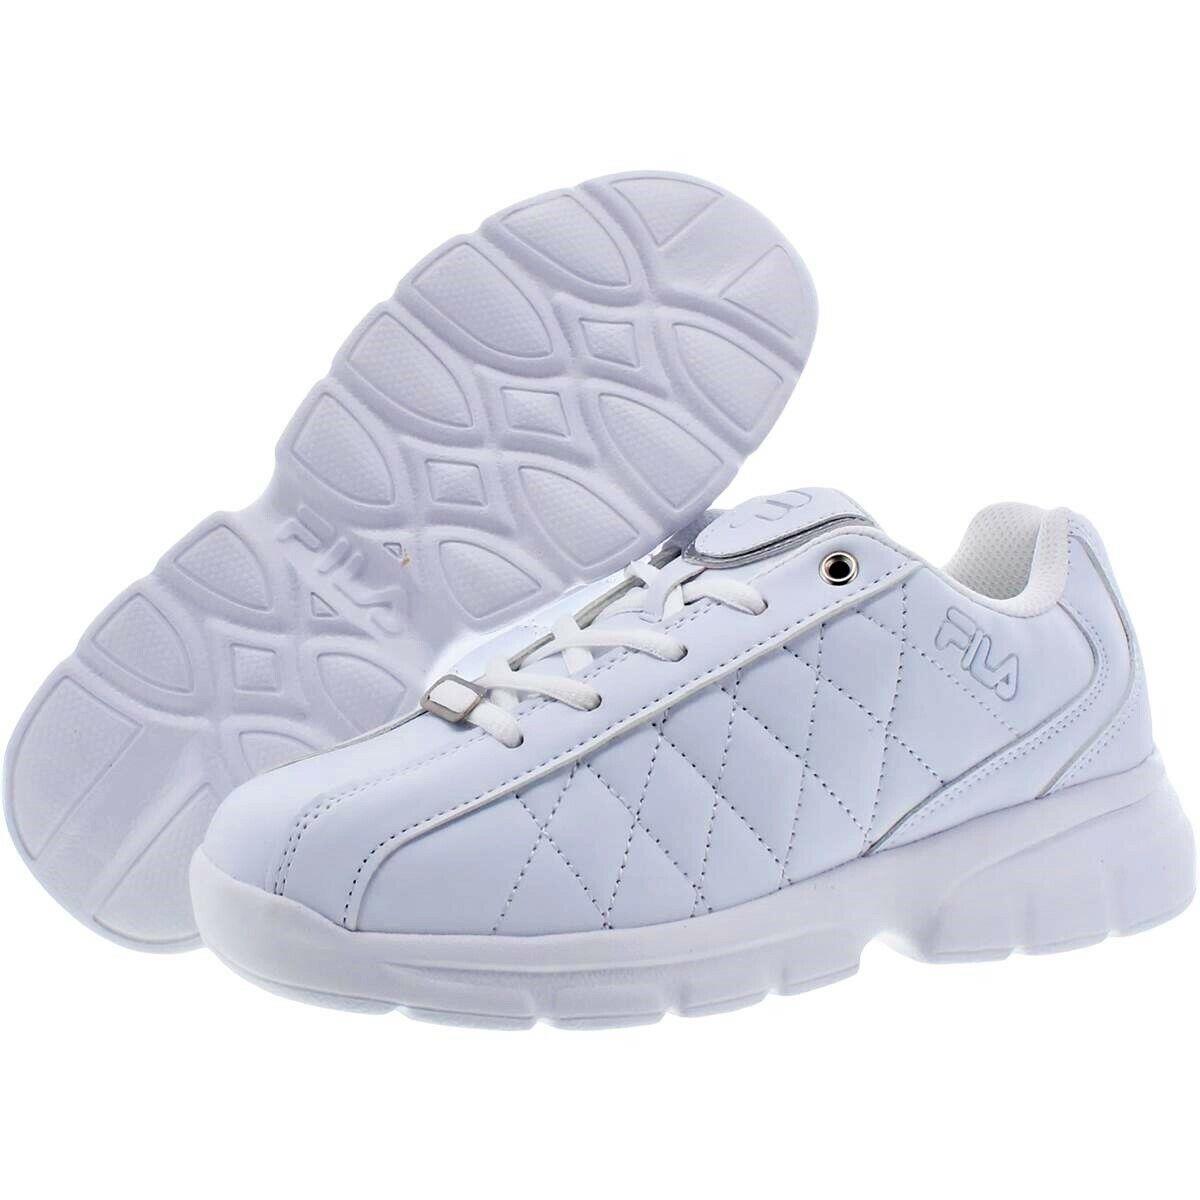 Fila Womens Fulcrum 3 Leather Quilt Fashion Sneakers Shoes SZ 9 M